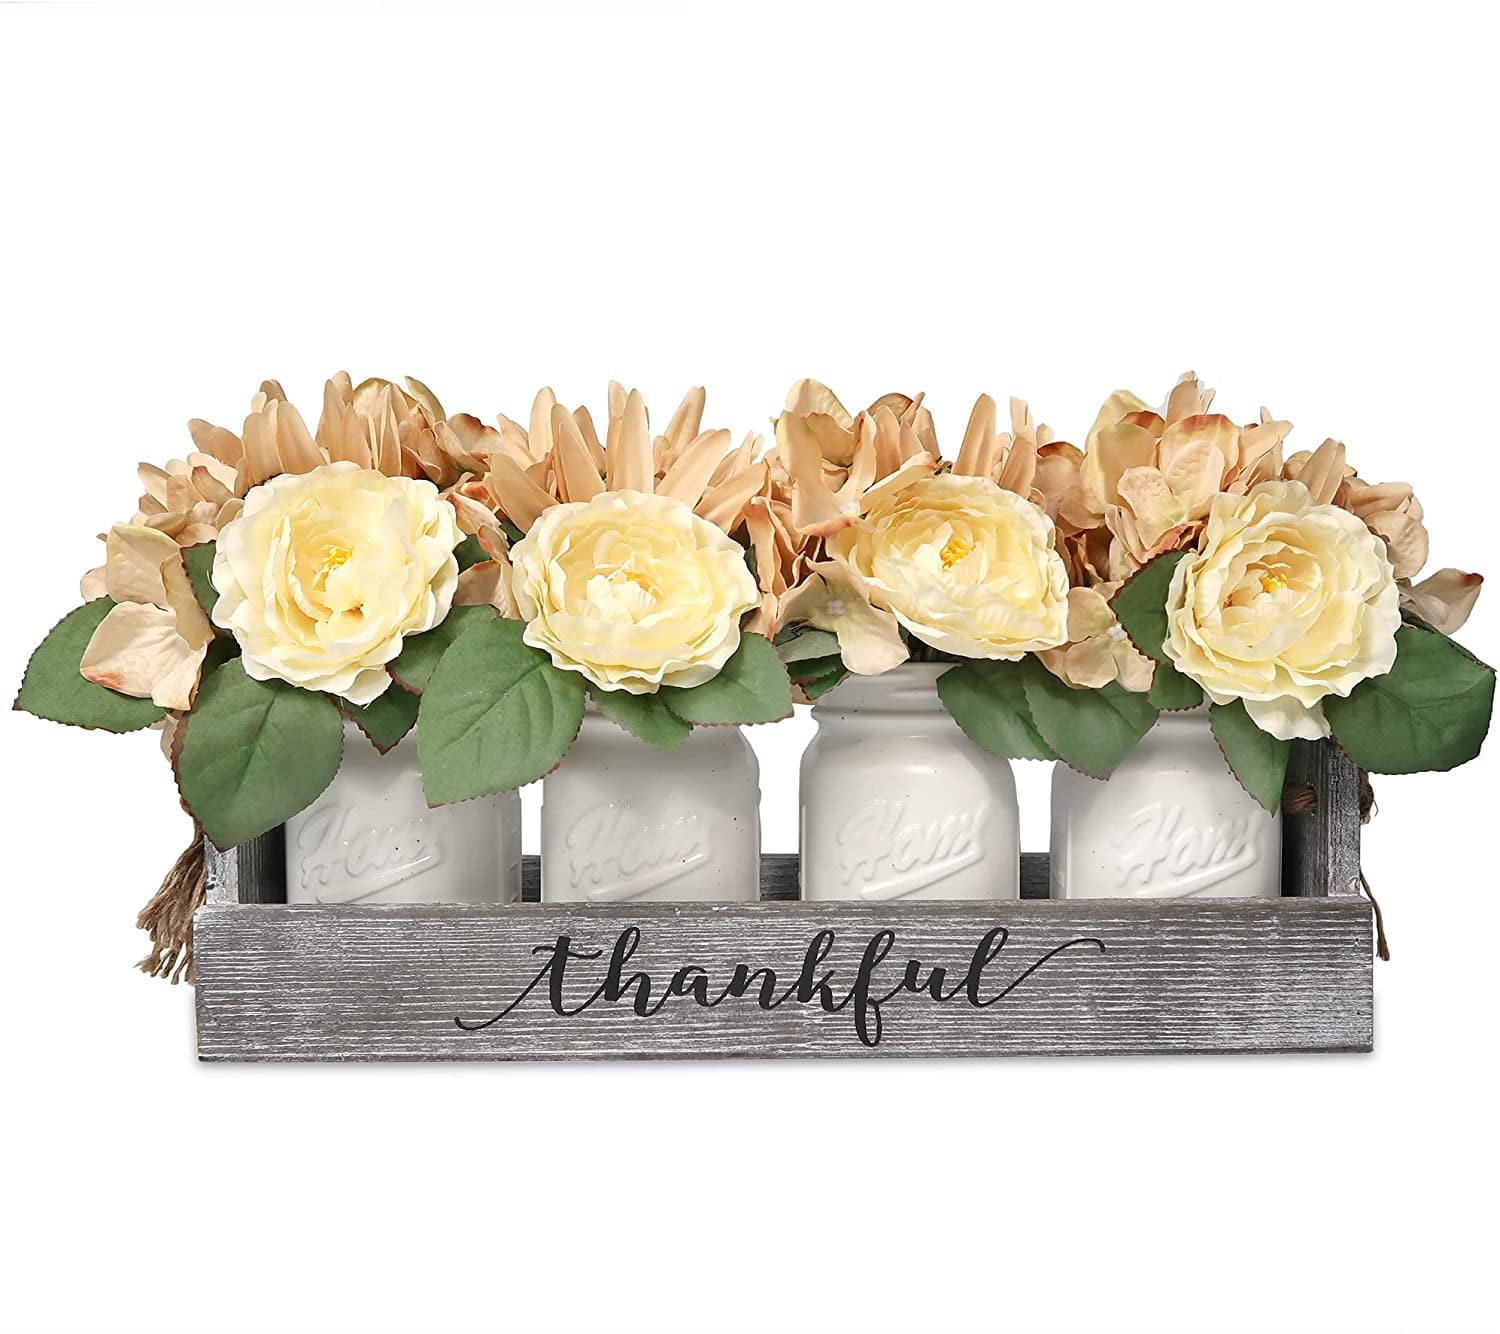 Kitchen Dining Table Centerpieces Living Room Gift Farmhouse Floral Wood Tray Modern Centerpieces with 4-White Mason Jars & Flowers for Dining Room